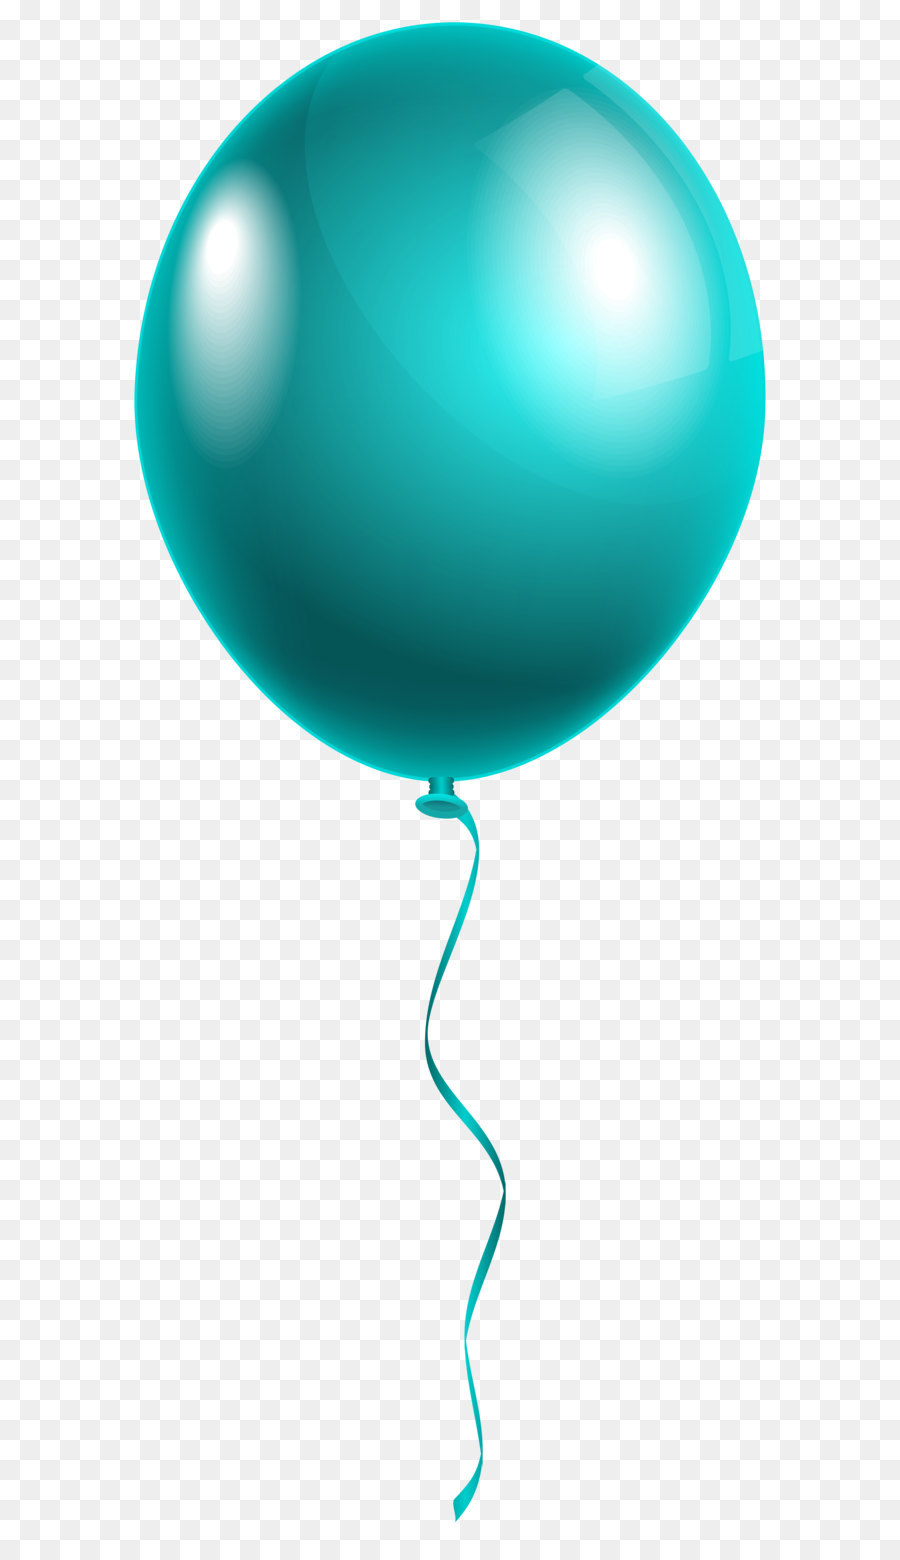 Balloon Sphere Font - Single Modern Blue Balloon PNG Clipart Image png download - 2681*6372 - Free Transparent Turquoise png Download.